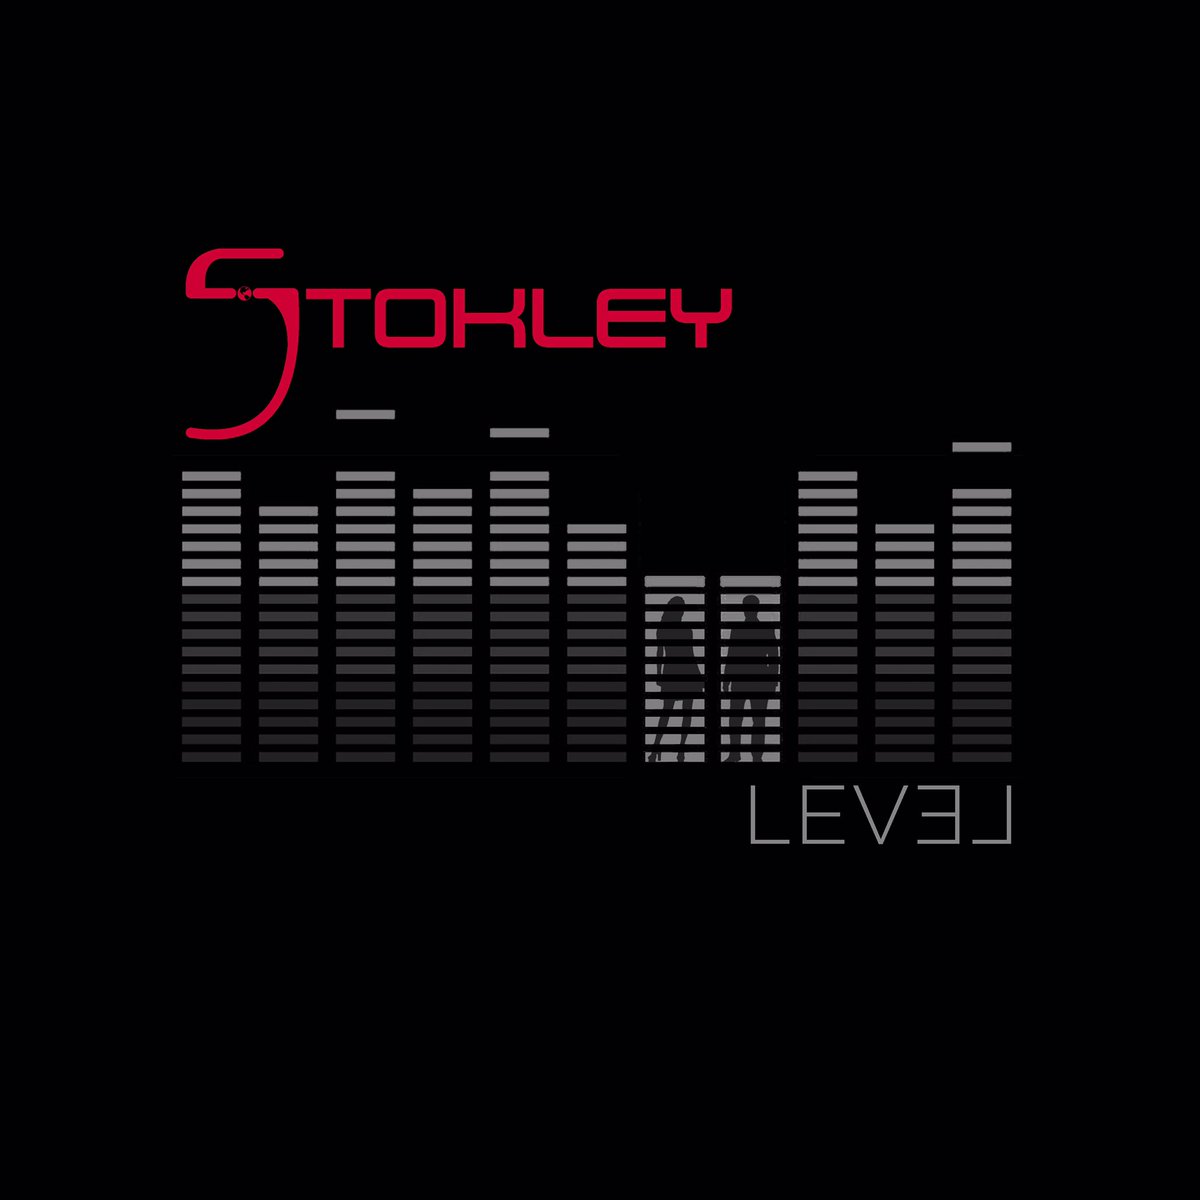 New Video: Stokley Williams (of Mint Condition) – Level